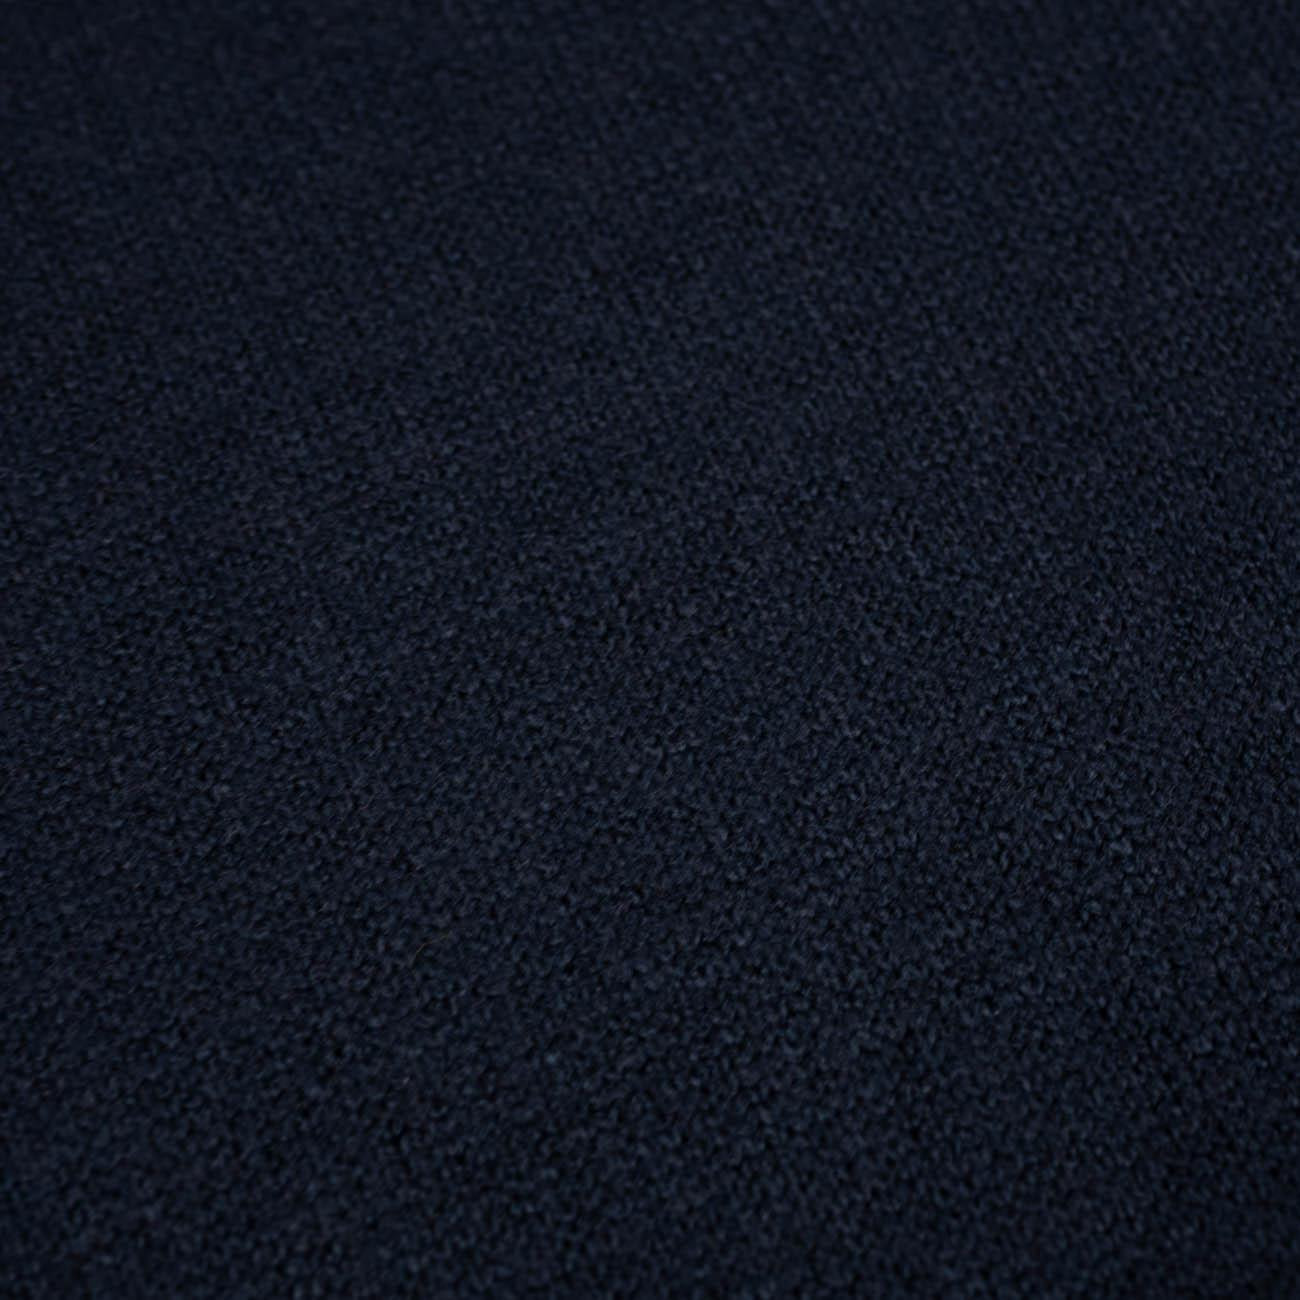 Navy - solid Sweater knit fabric